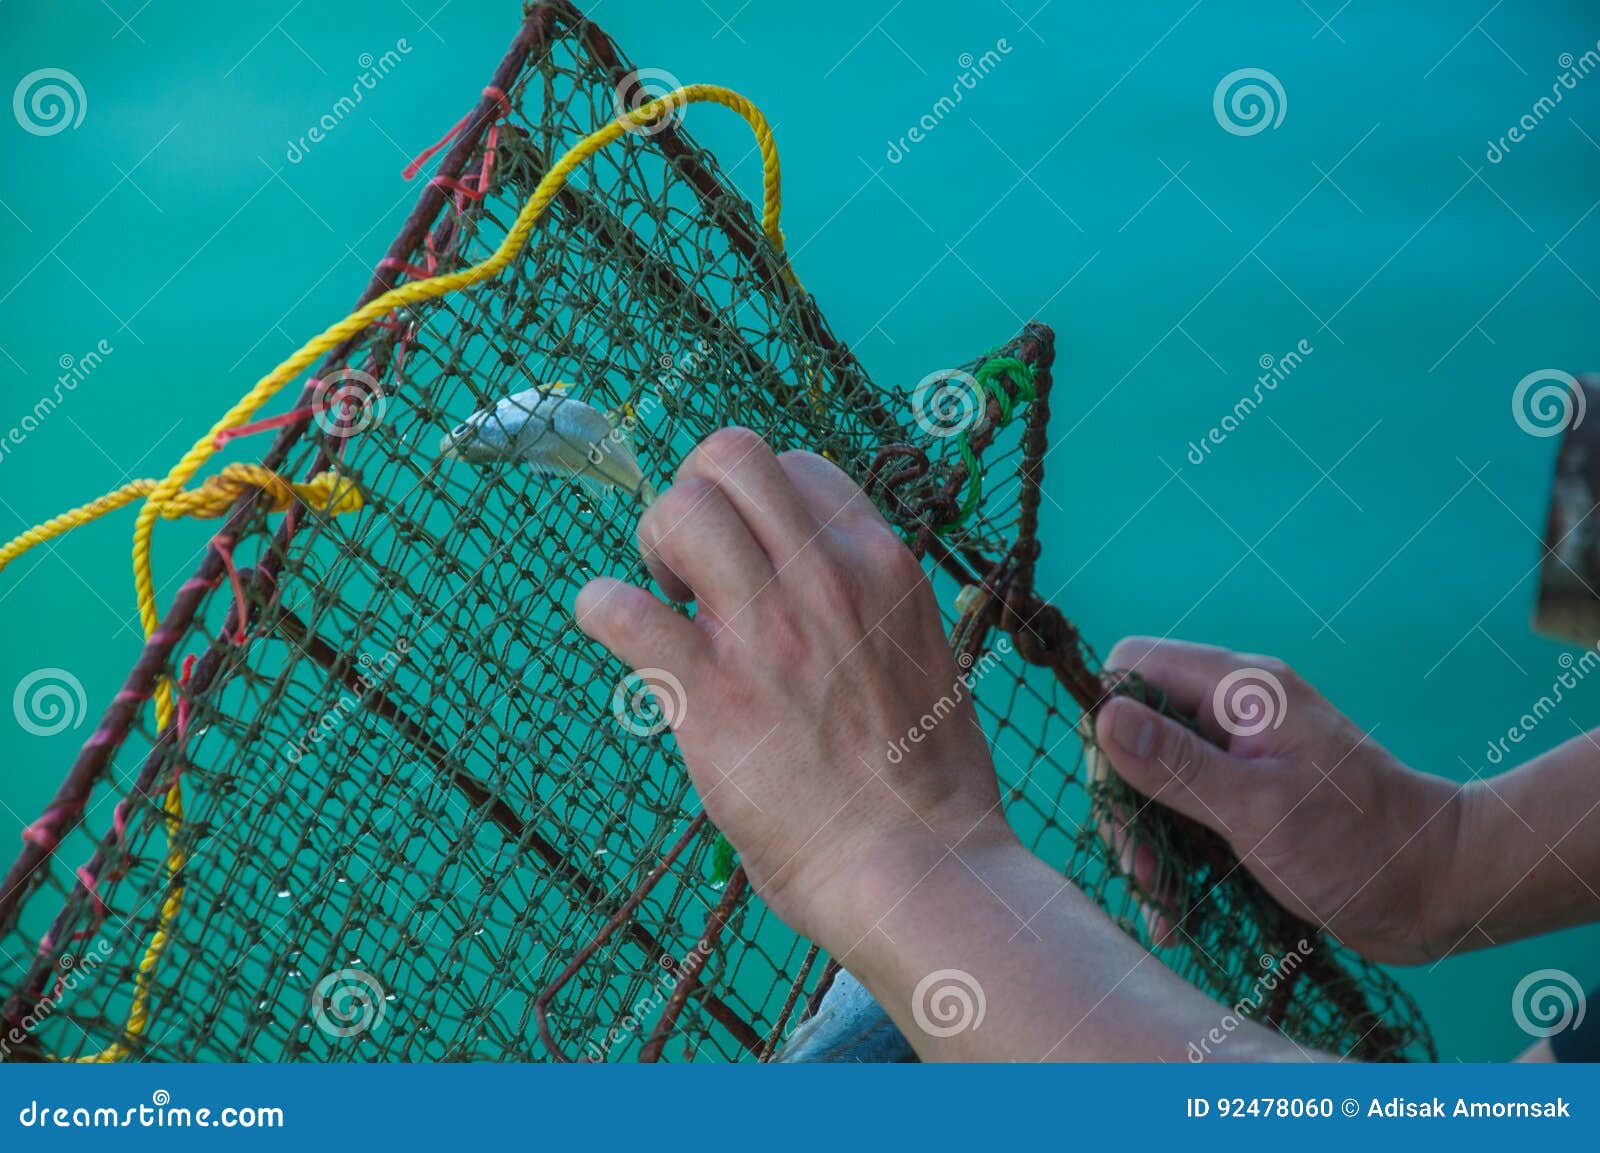 https://thumbs.dreamstime.com/z/fisherman-try-to-unpack-trapped-fish-fishing-net-background-blue-sea-netting-92478060.jpg